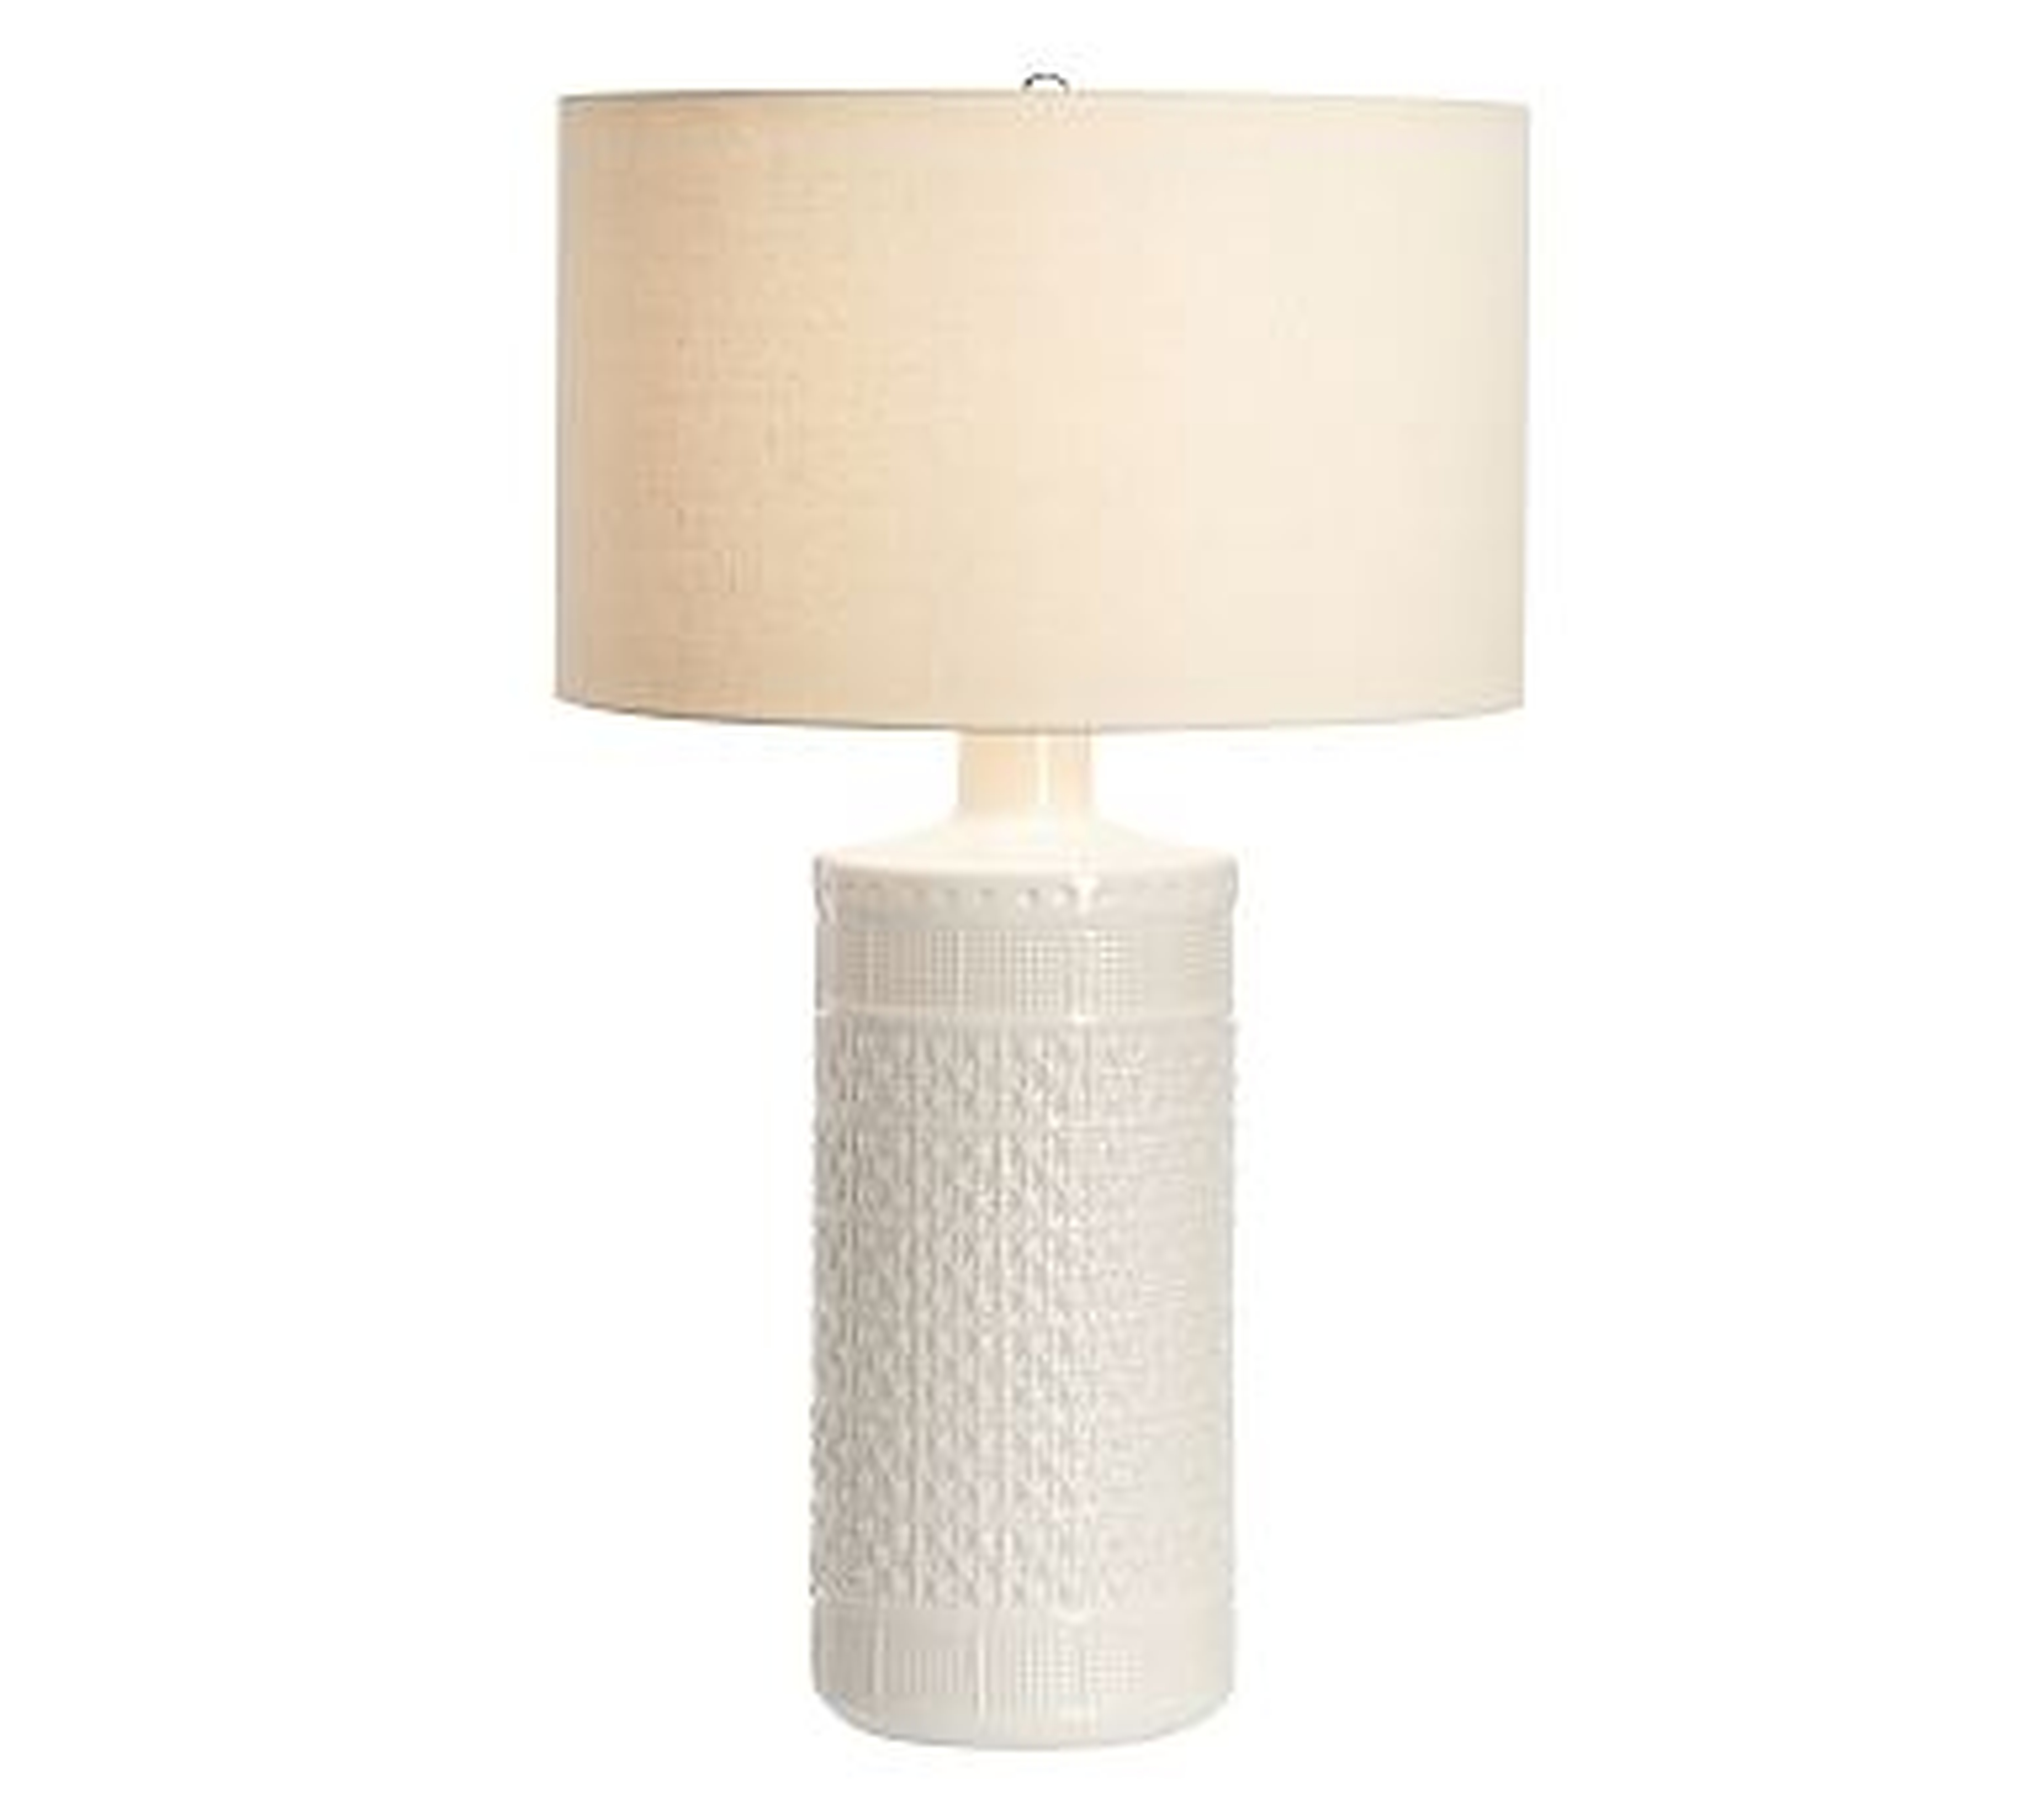 Jamie Young Ceramic Column Table Lamp, White - Pottery Barn